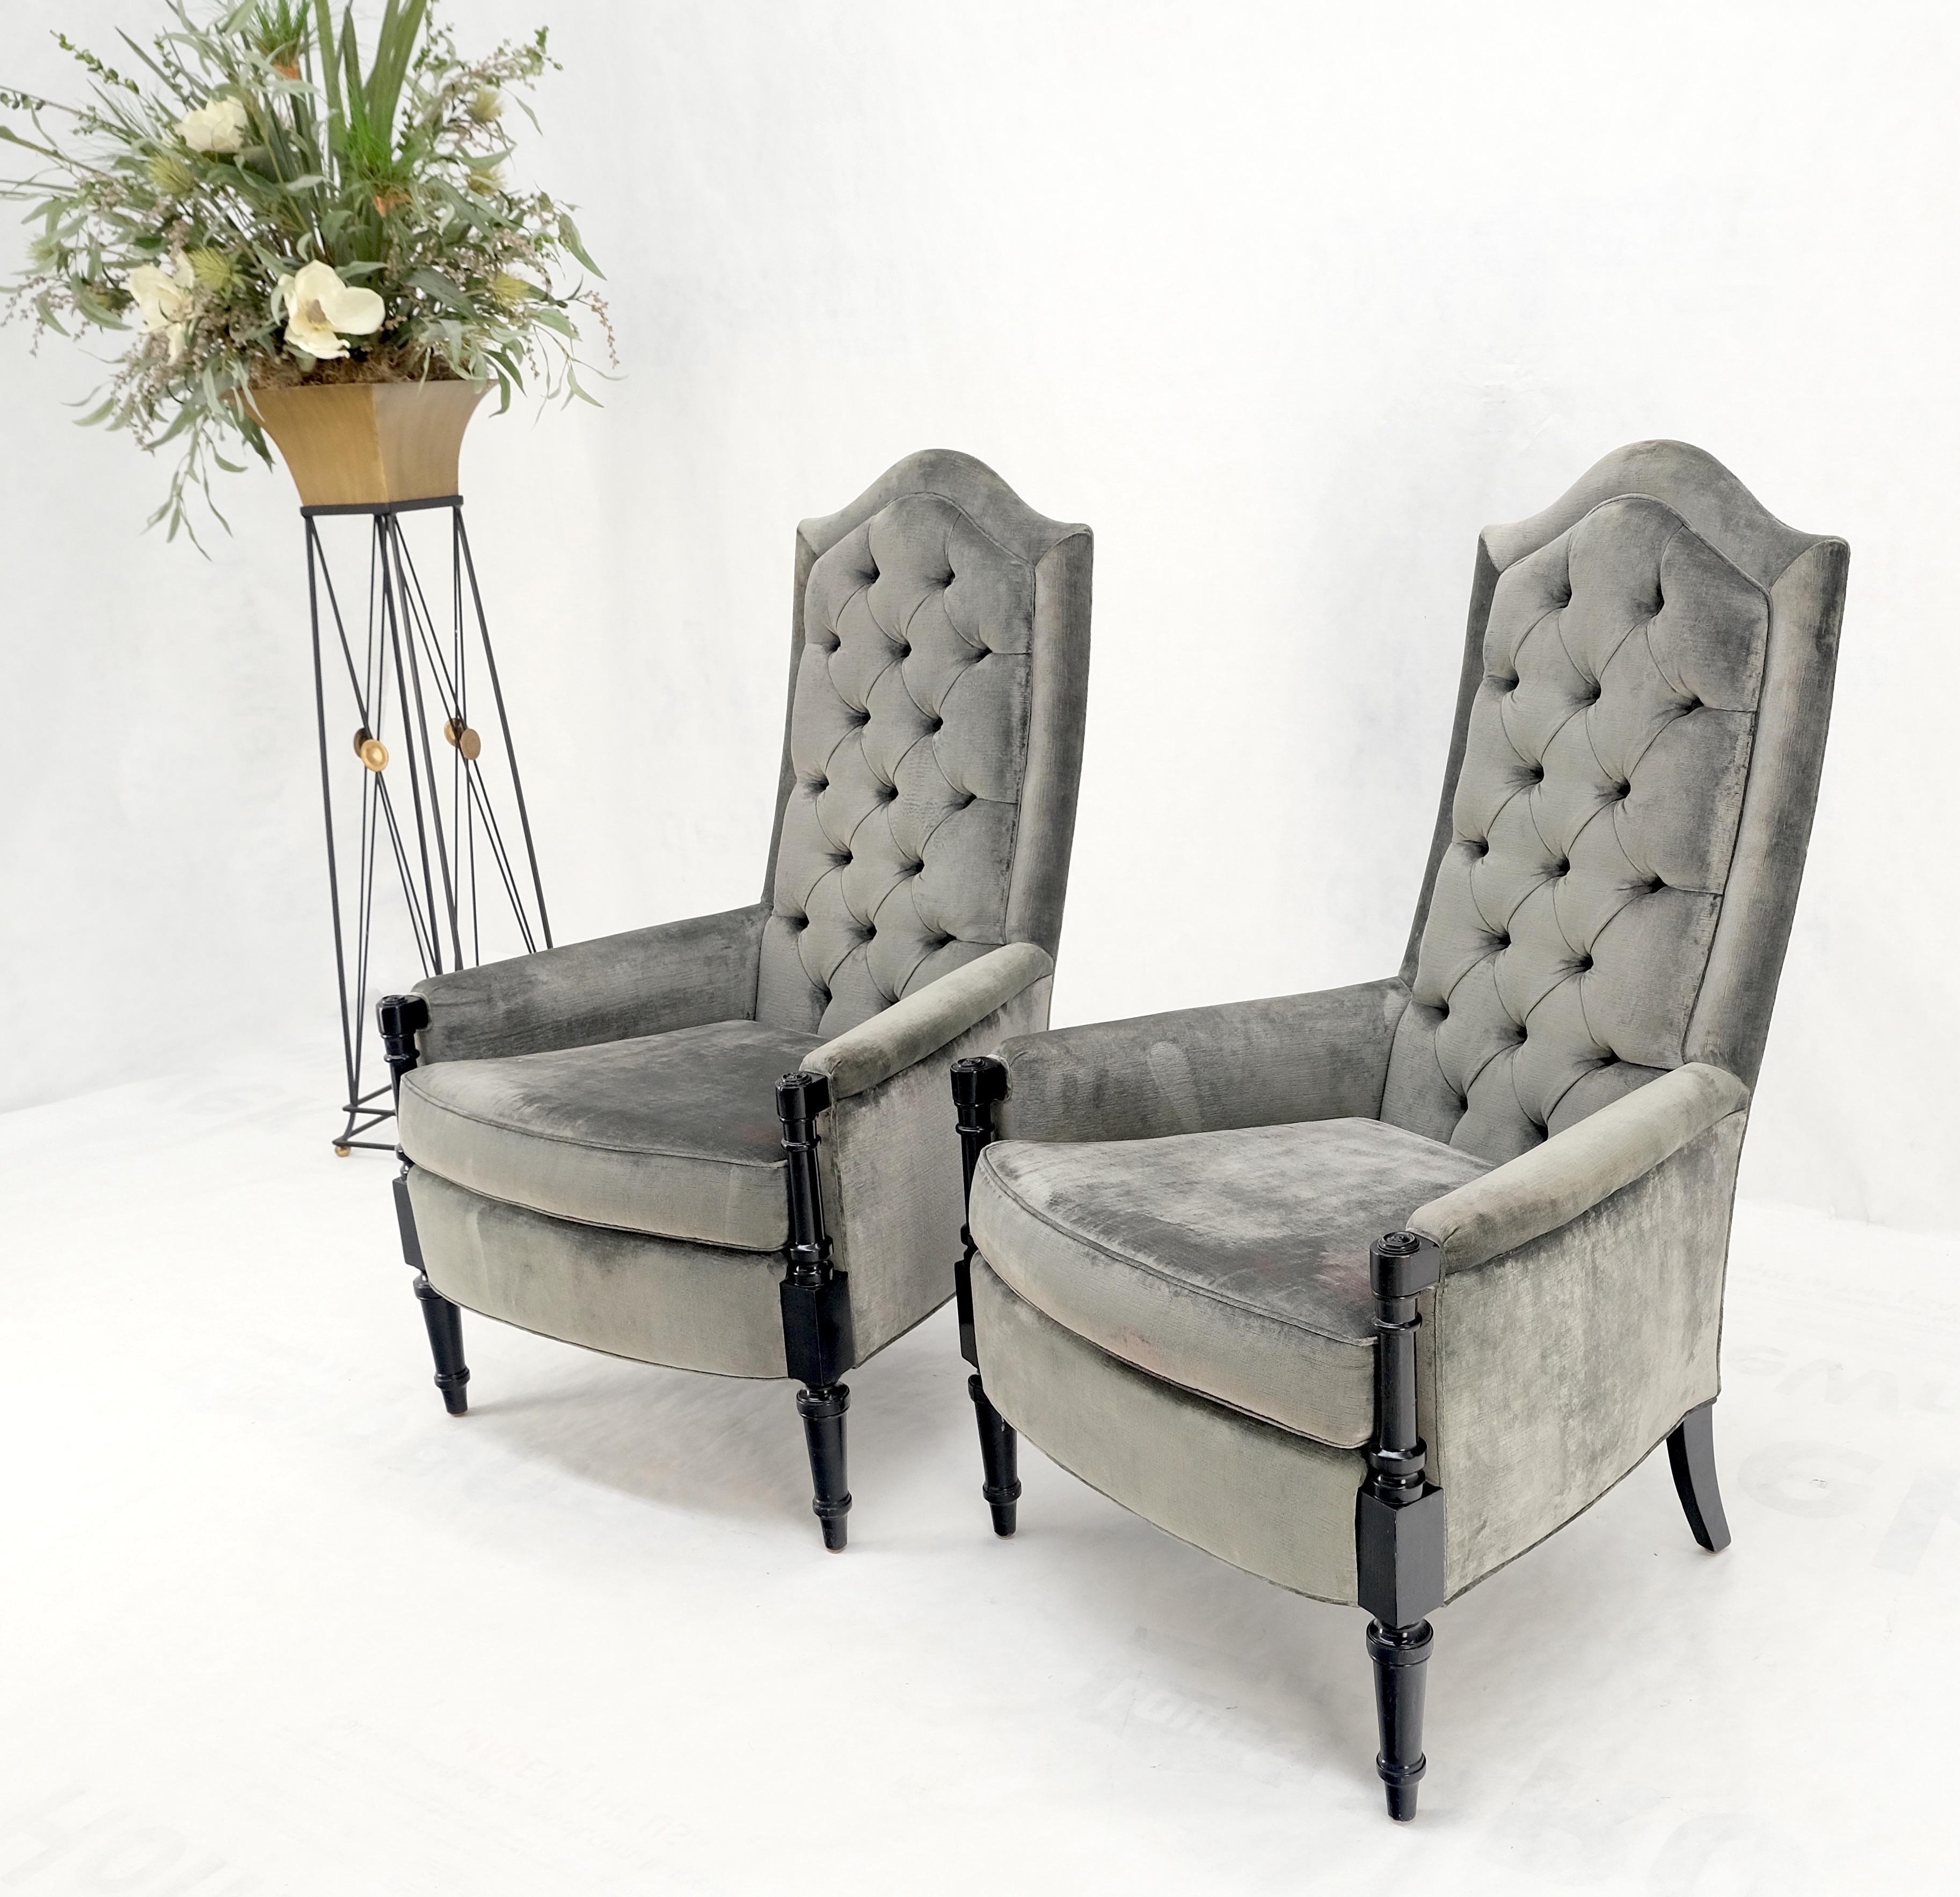 Pair of Tall Tufted Backs Black Lacquer Frames Decorative Arm Chairs Thrones For Sale 5